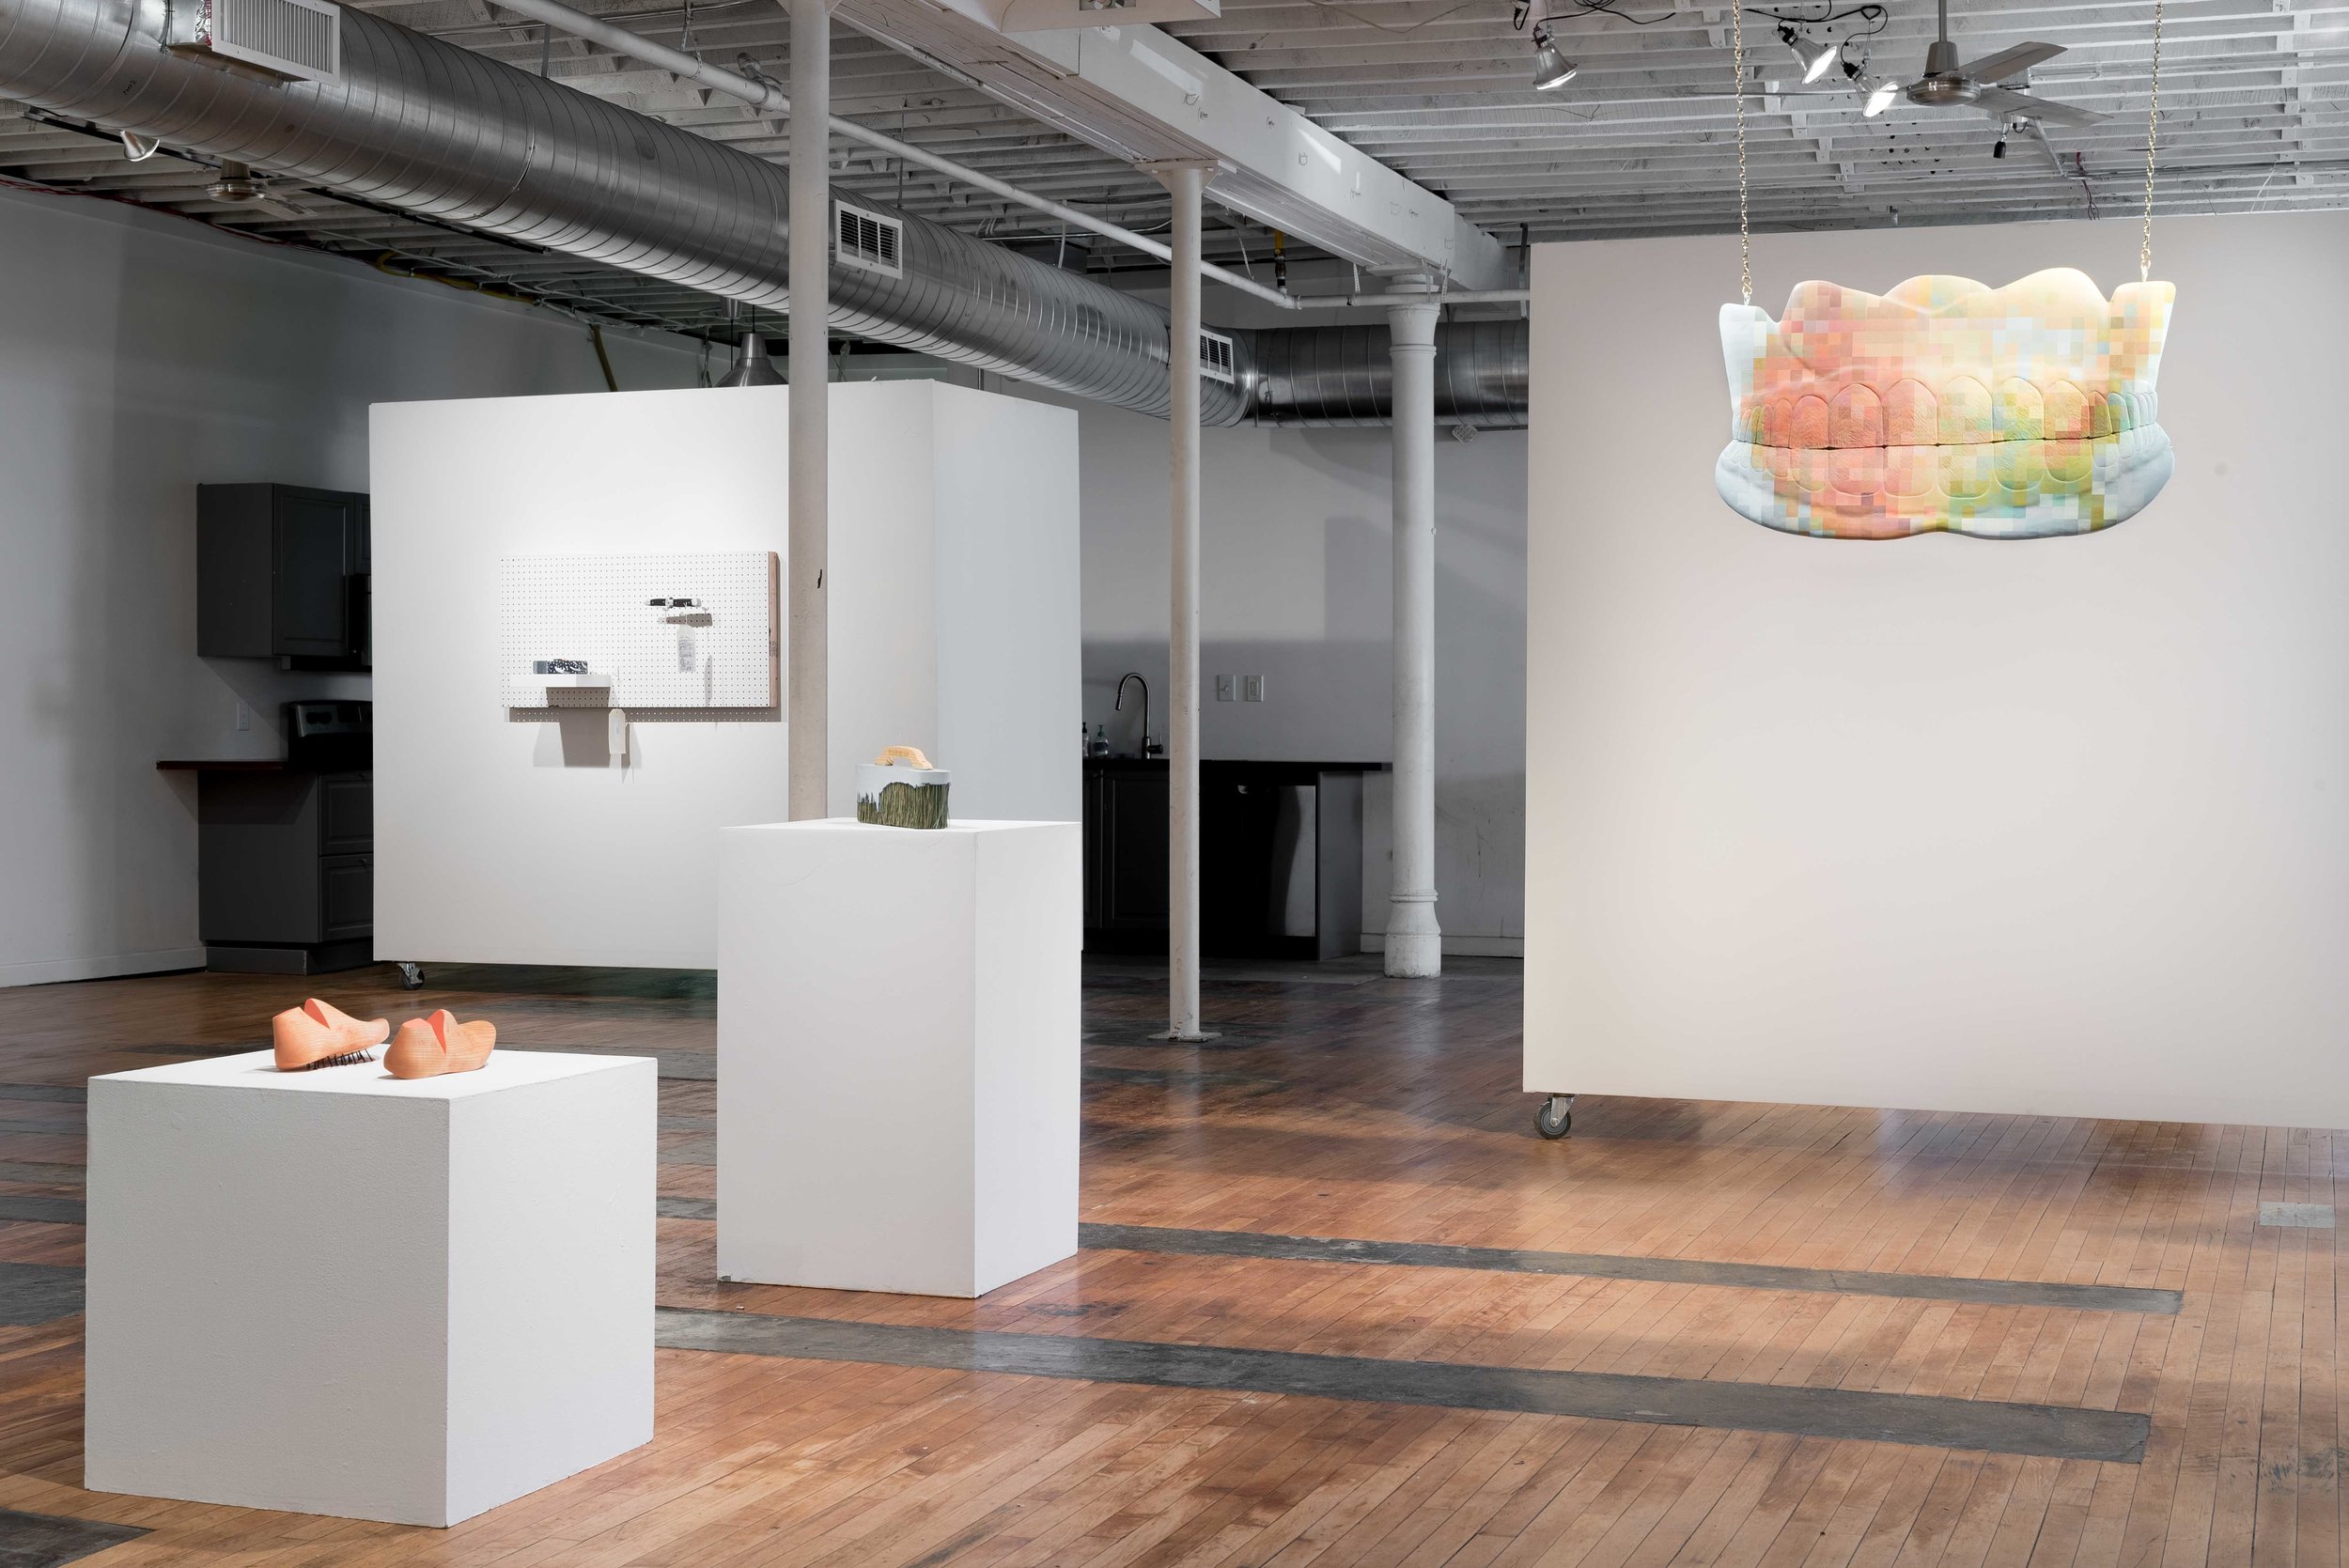 Installation view: R KAUFF AND THE ART LAB PRESENT SOME OBJECTS AND OBJECTIONS OF THIS LAND